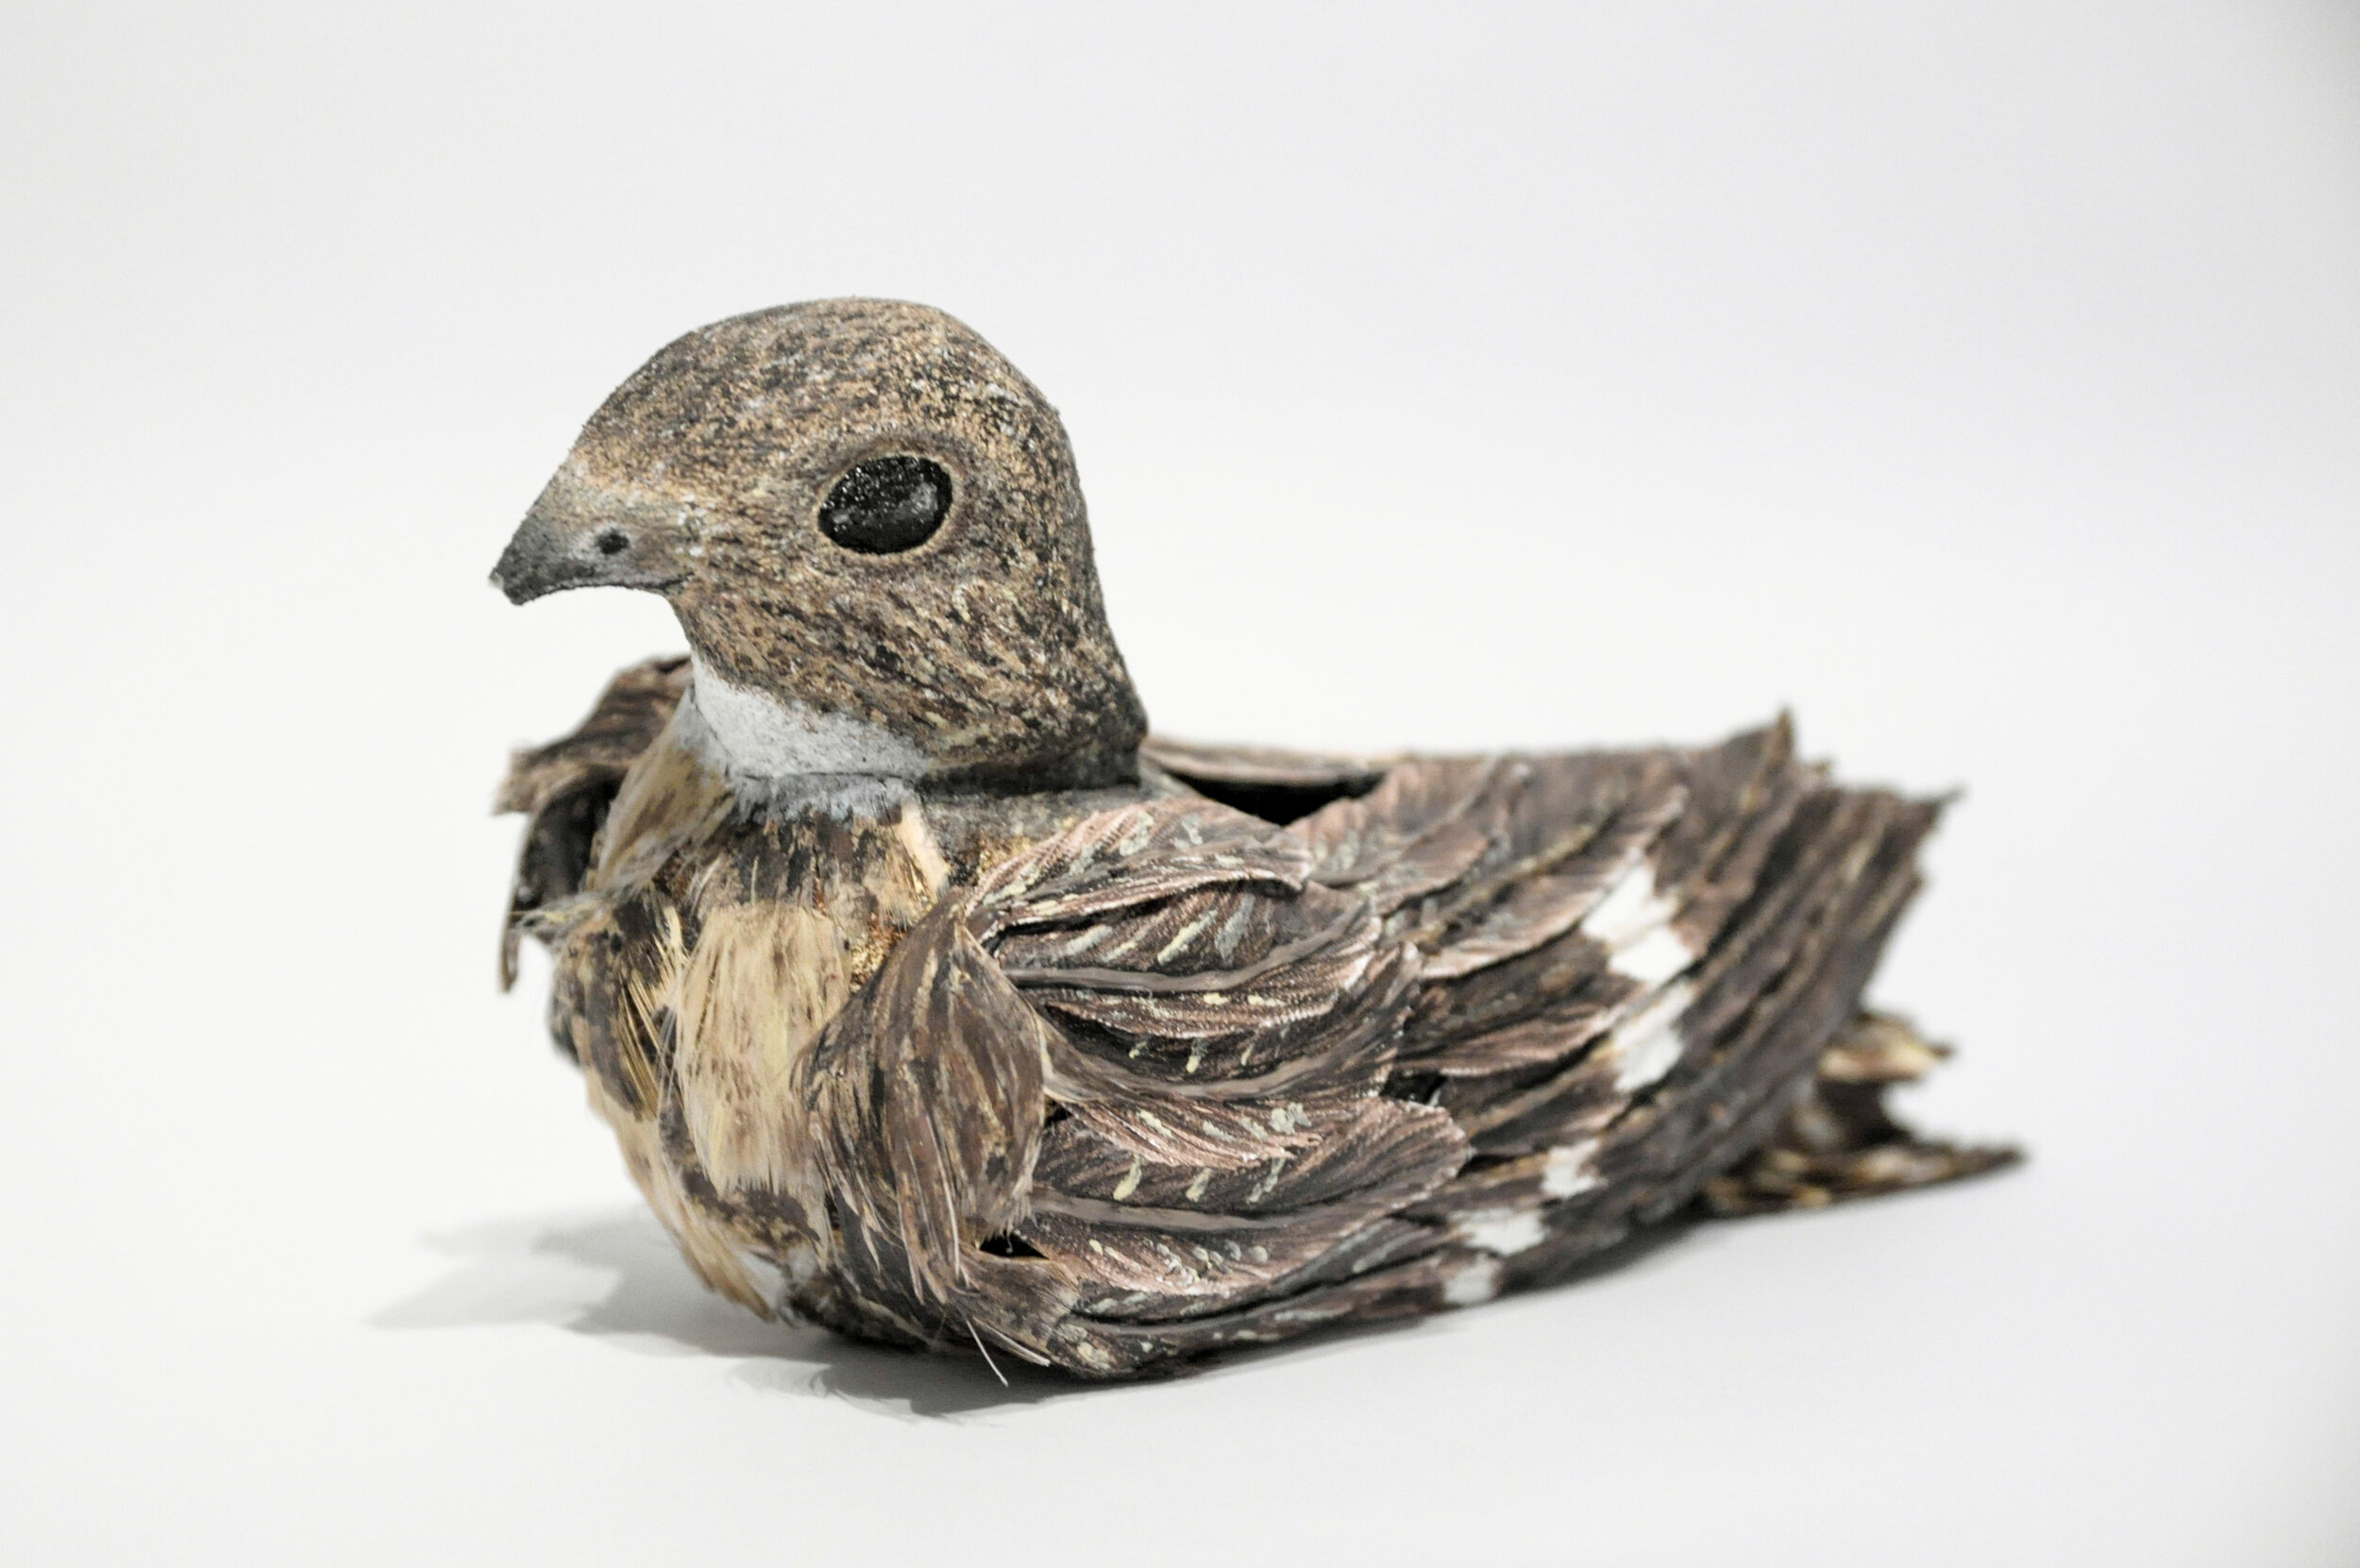  Common Nighthawk by Katie Ross 